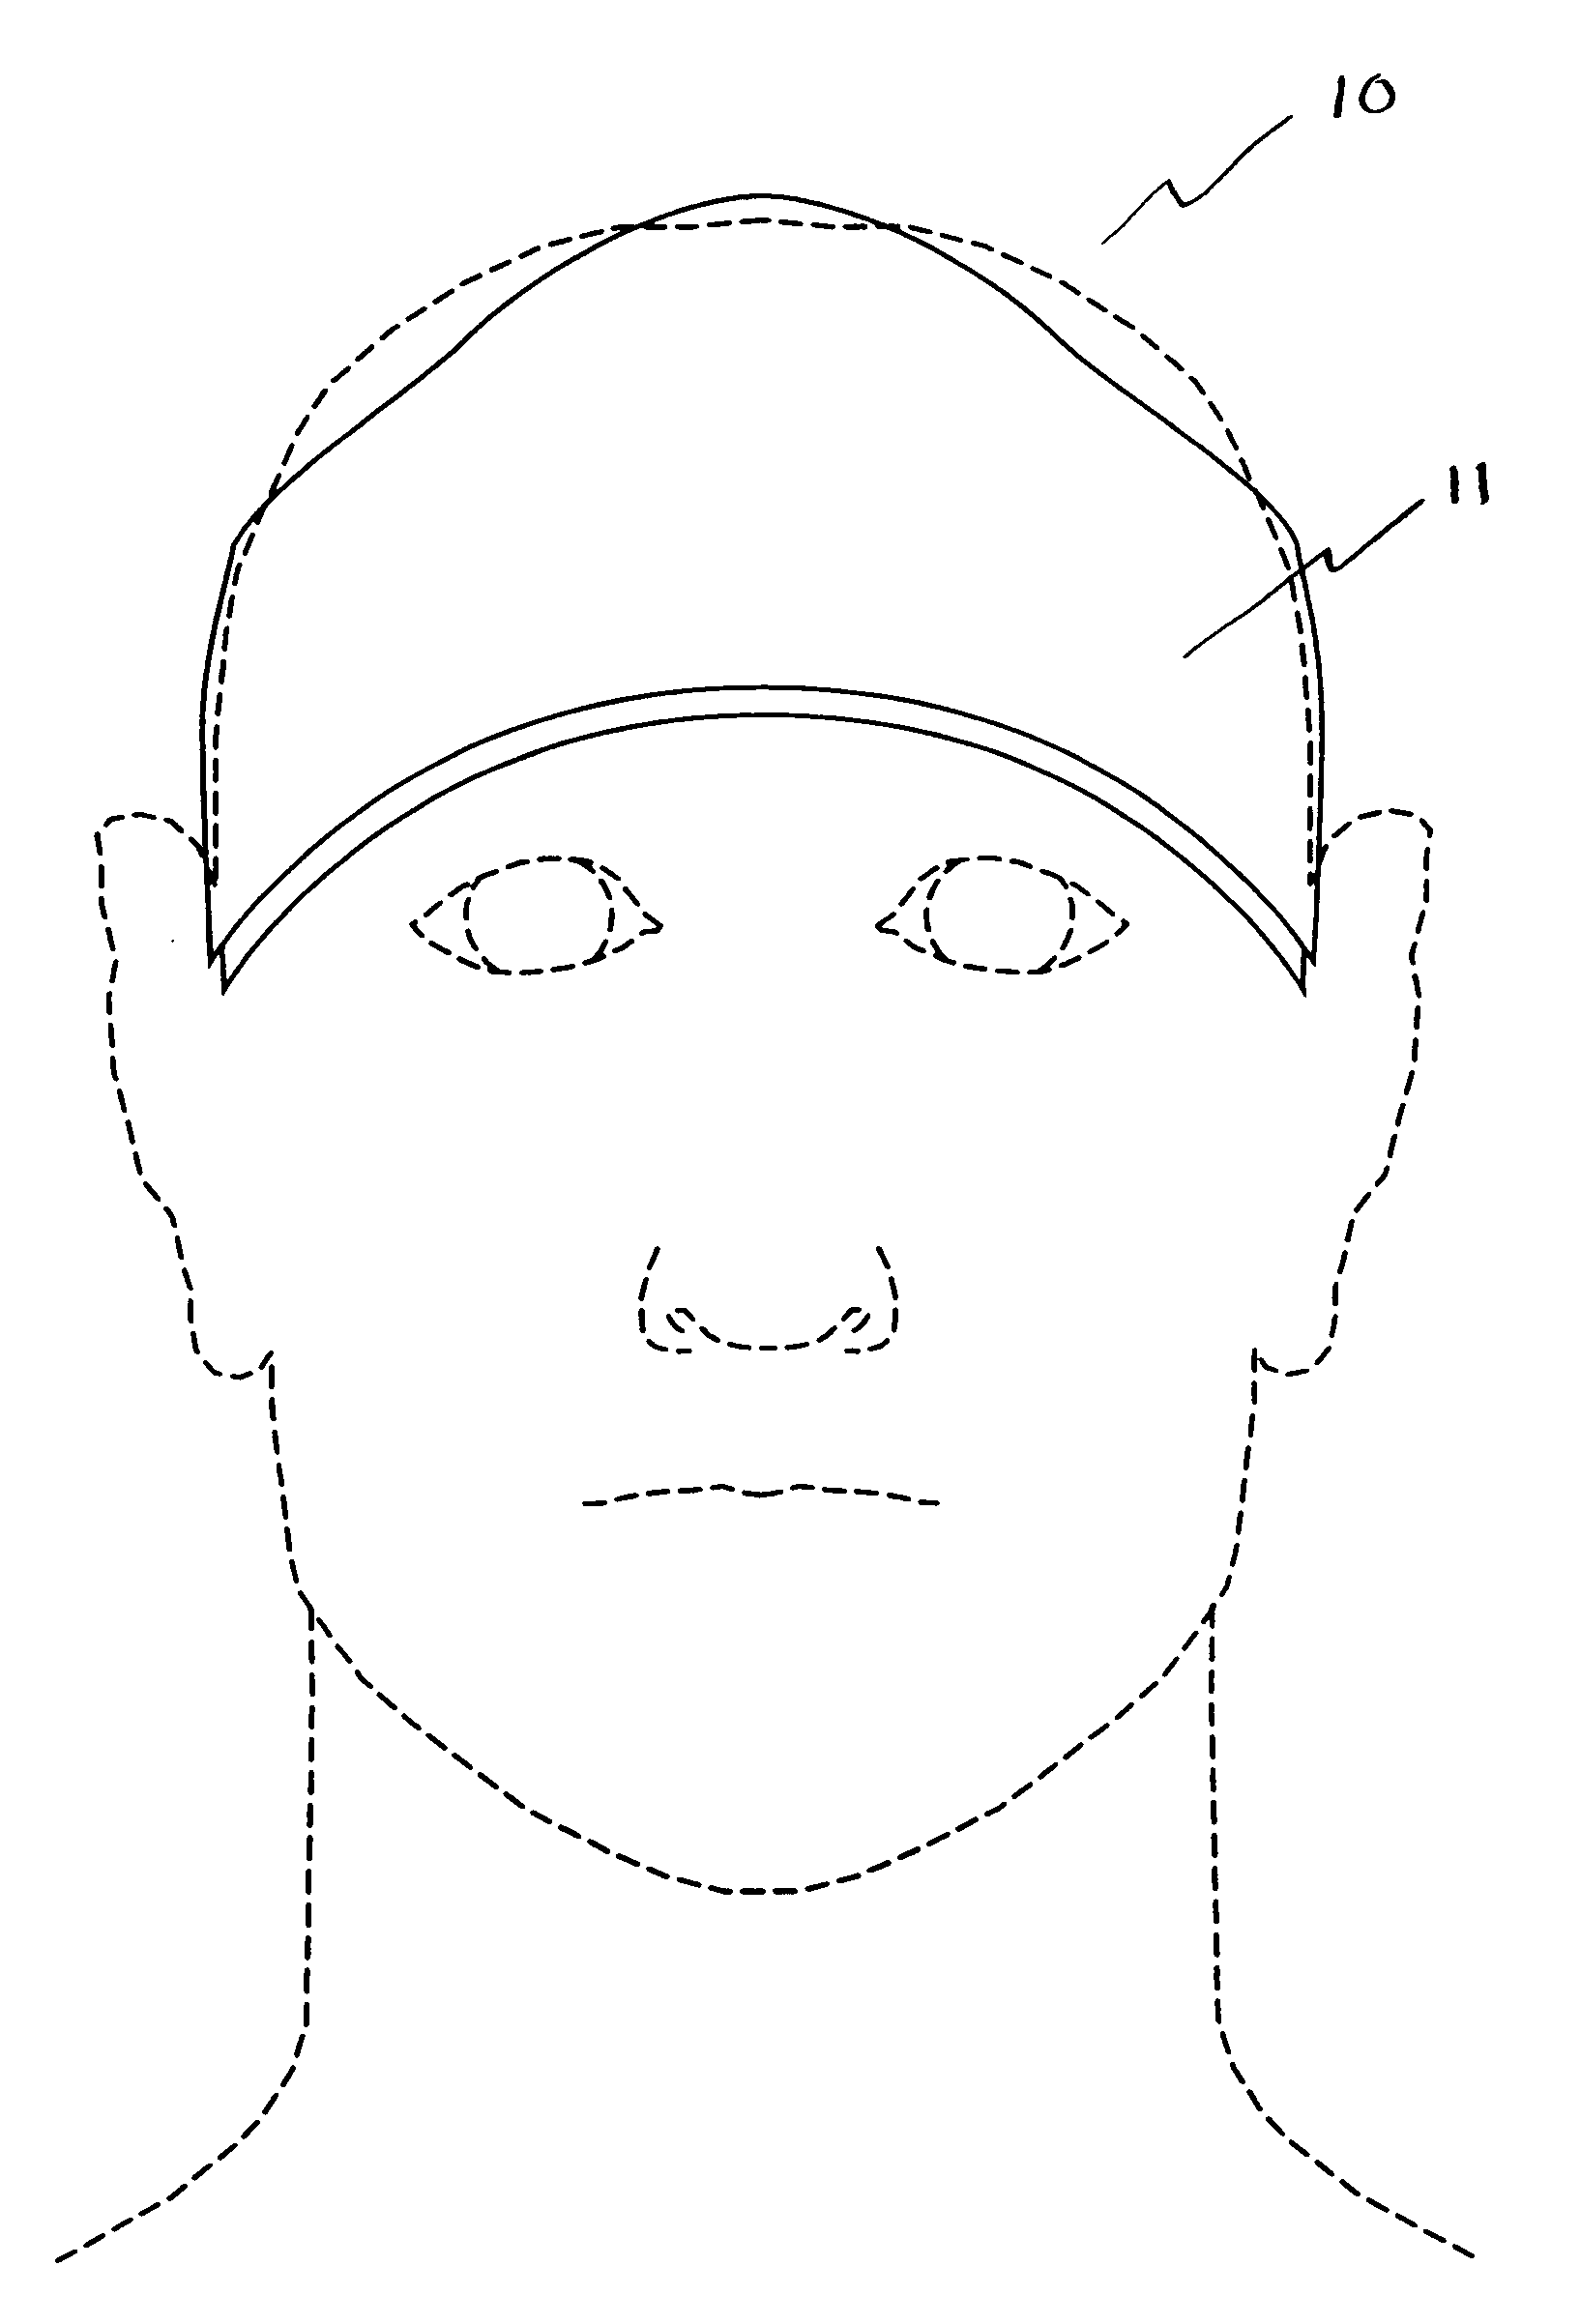 Method and apparatus of noninvasive, regional brain thermal stimuli for the treatment of neurological disorders